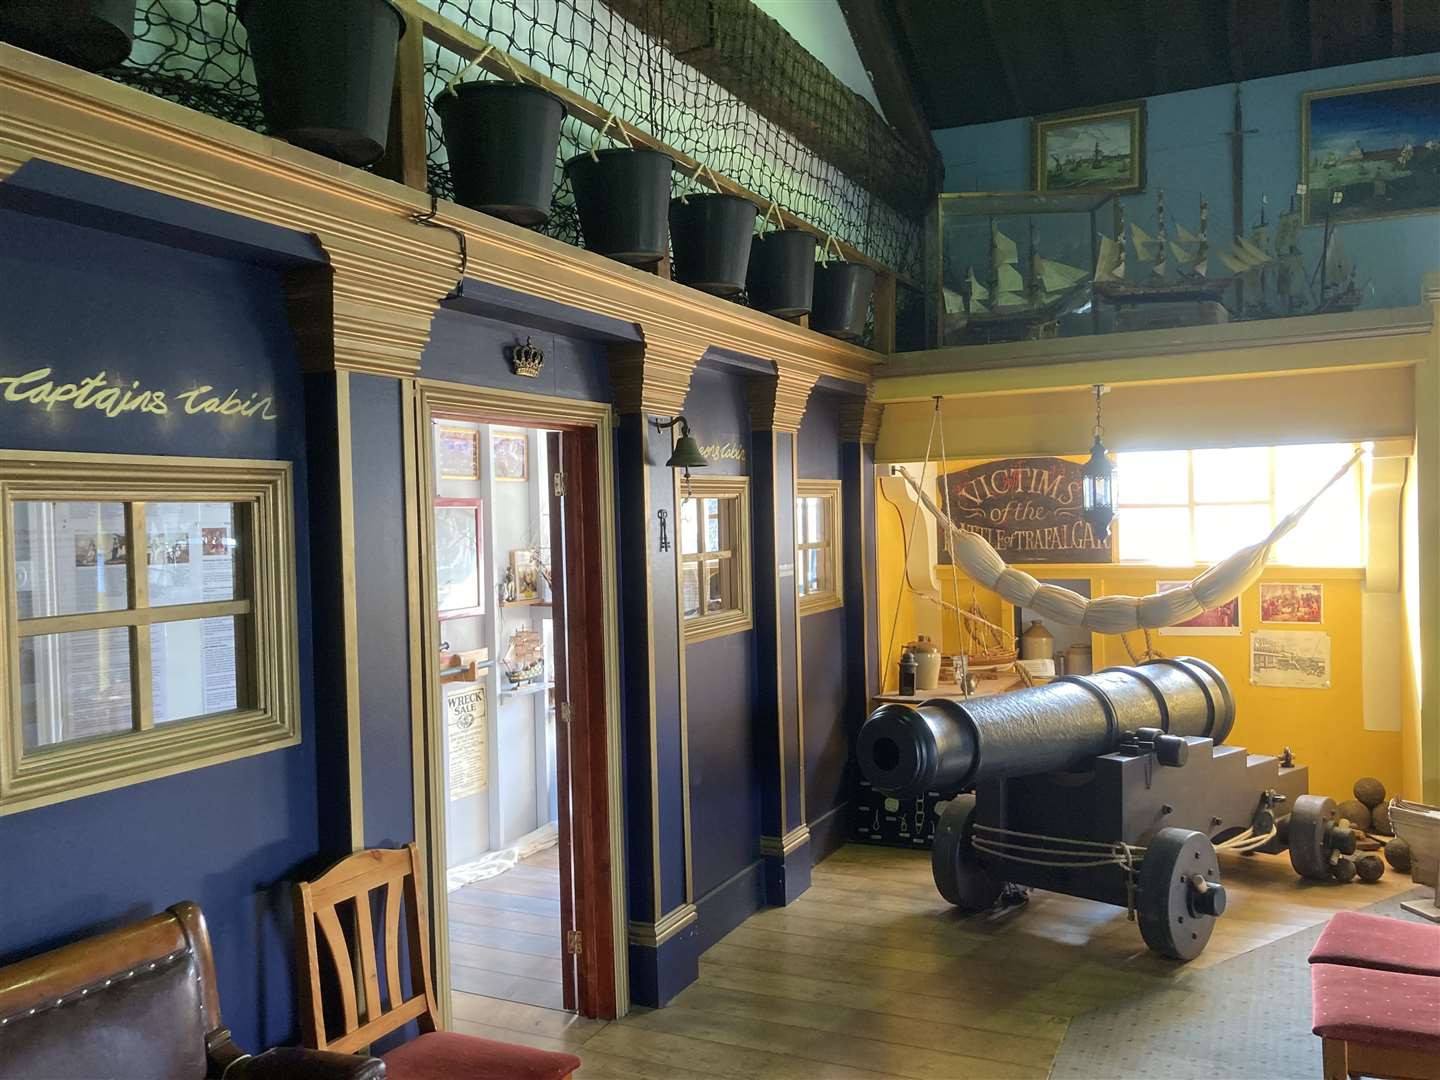 The maritime room at Blue Town Heritage Centre and Criterion Theatre